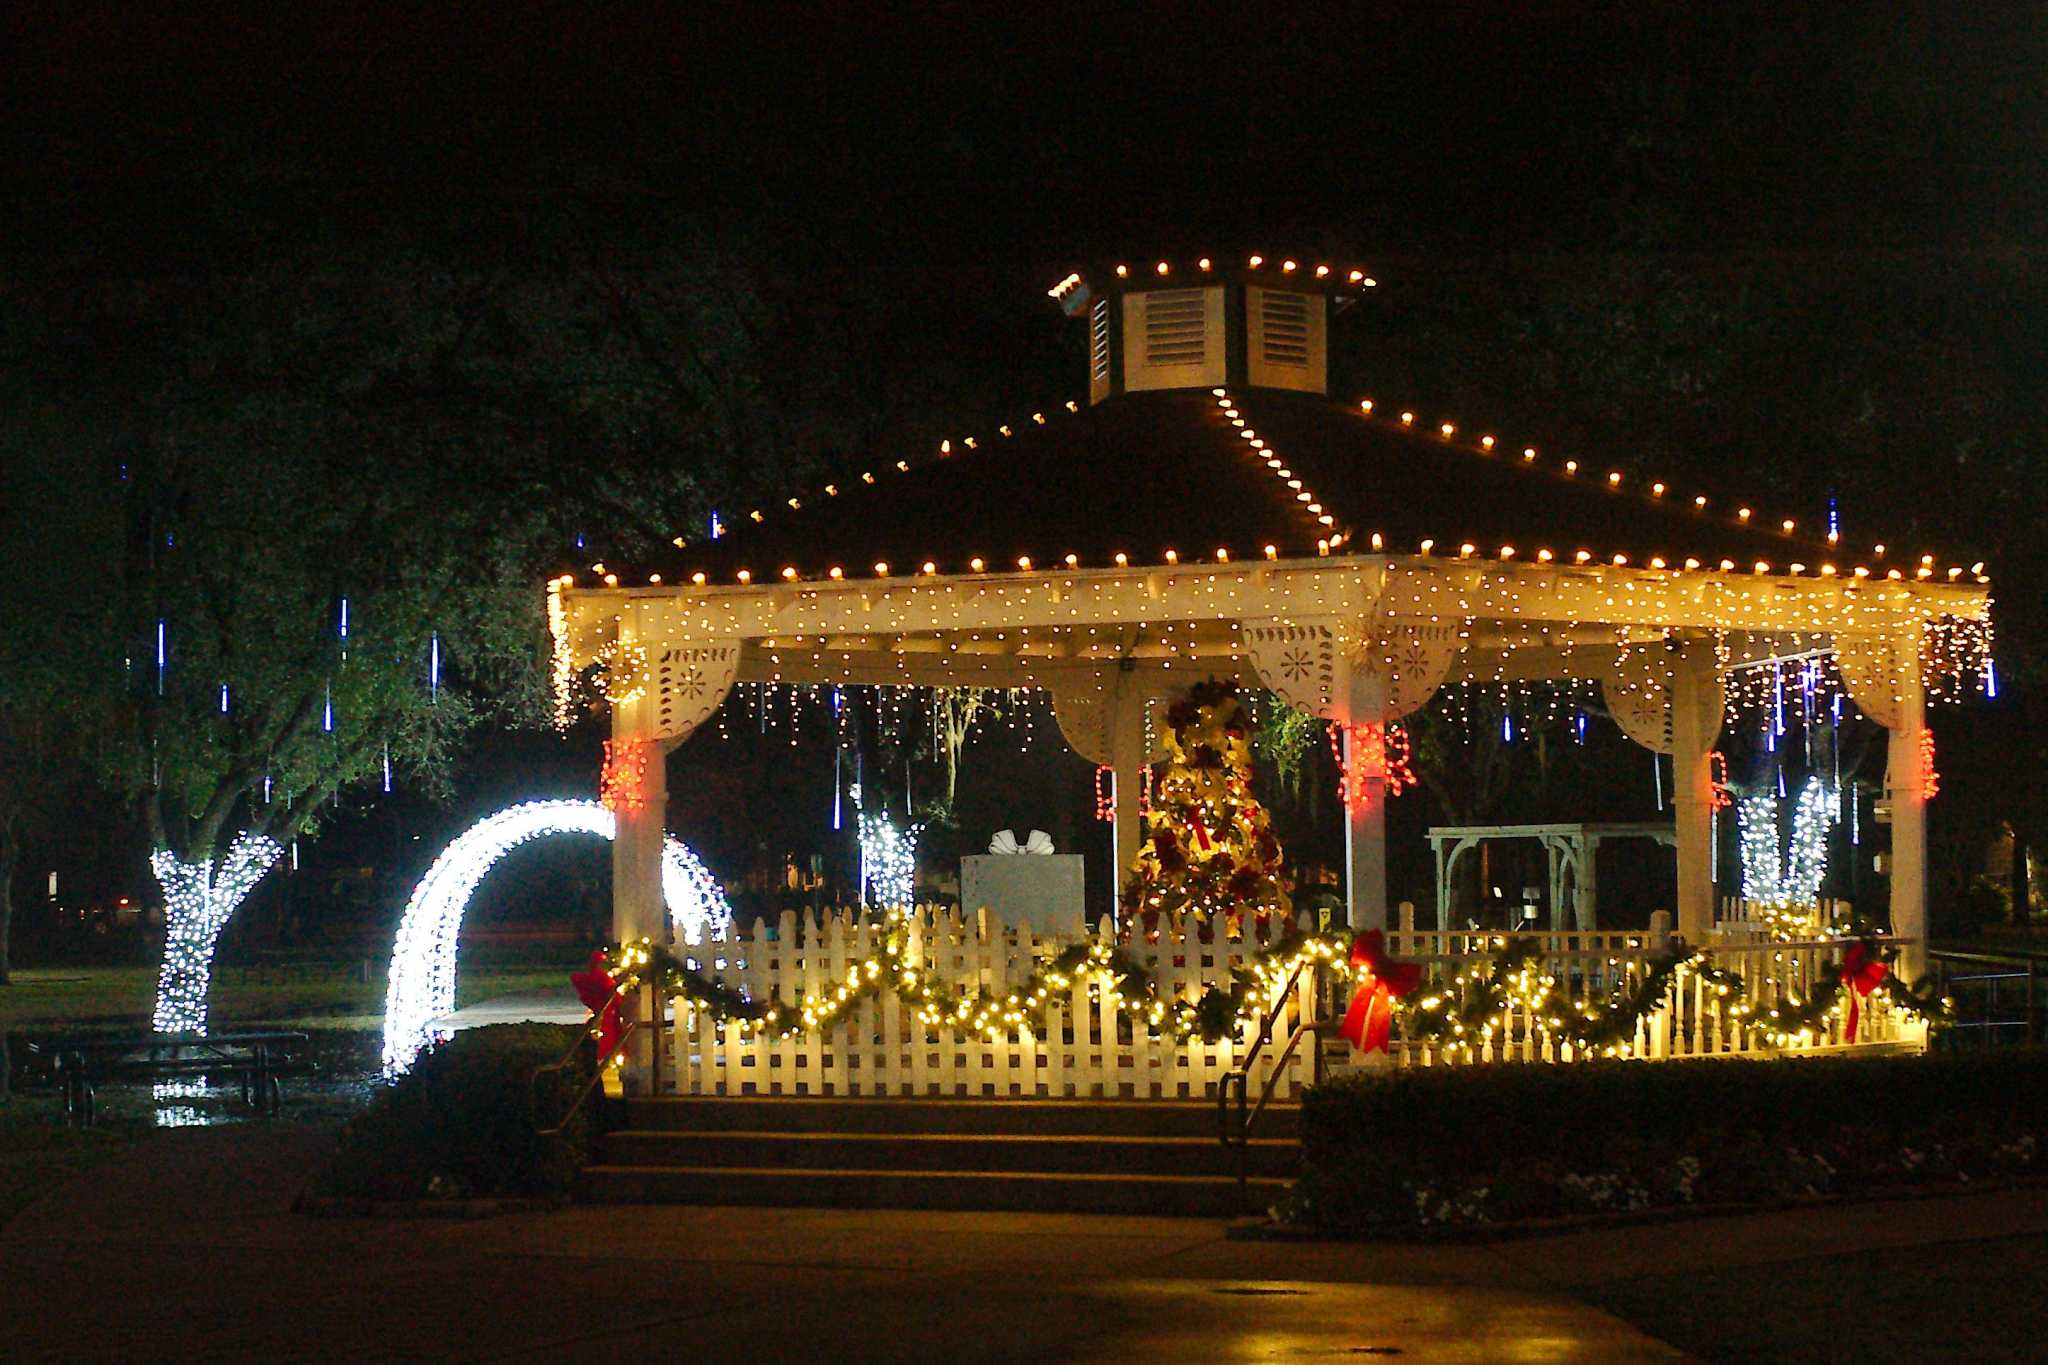 Homes festooned with lights throughout Friendswood